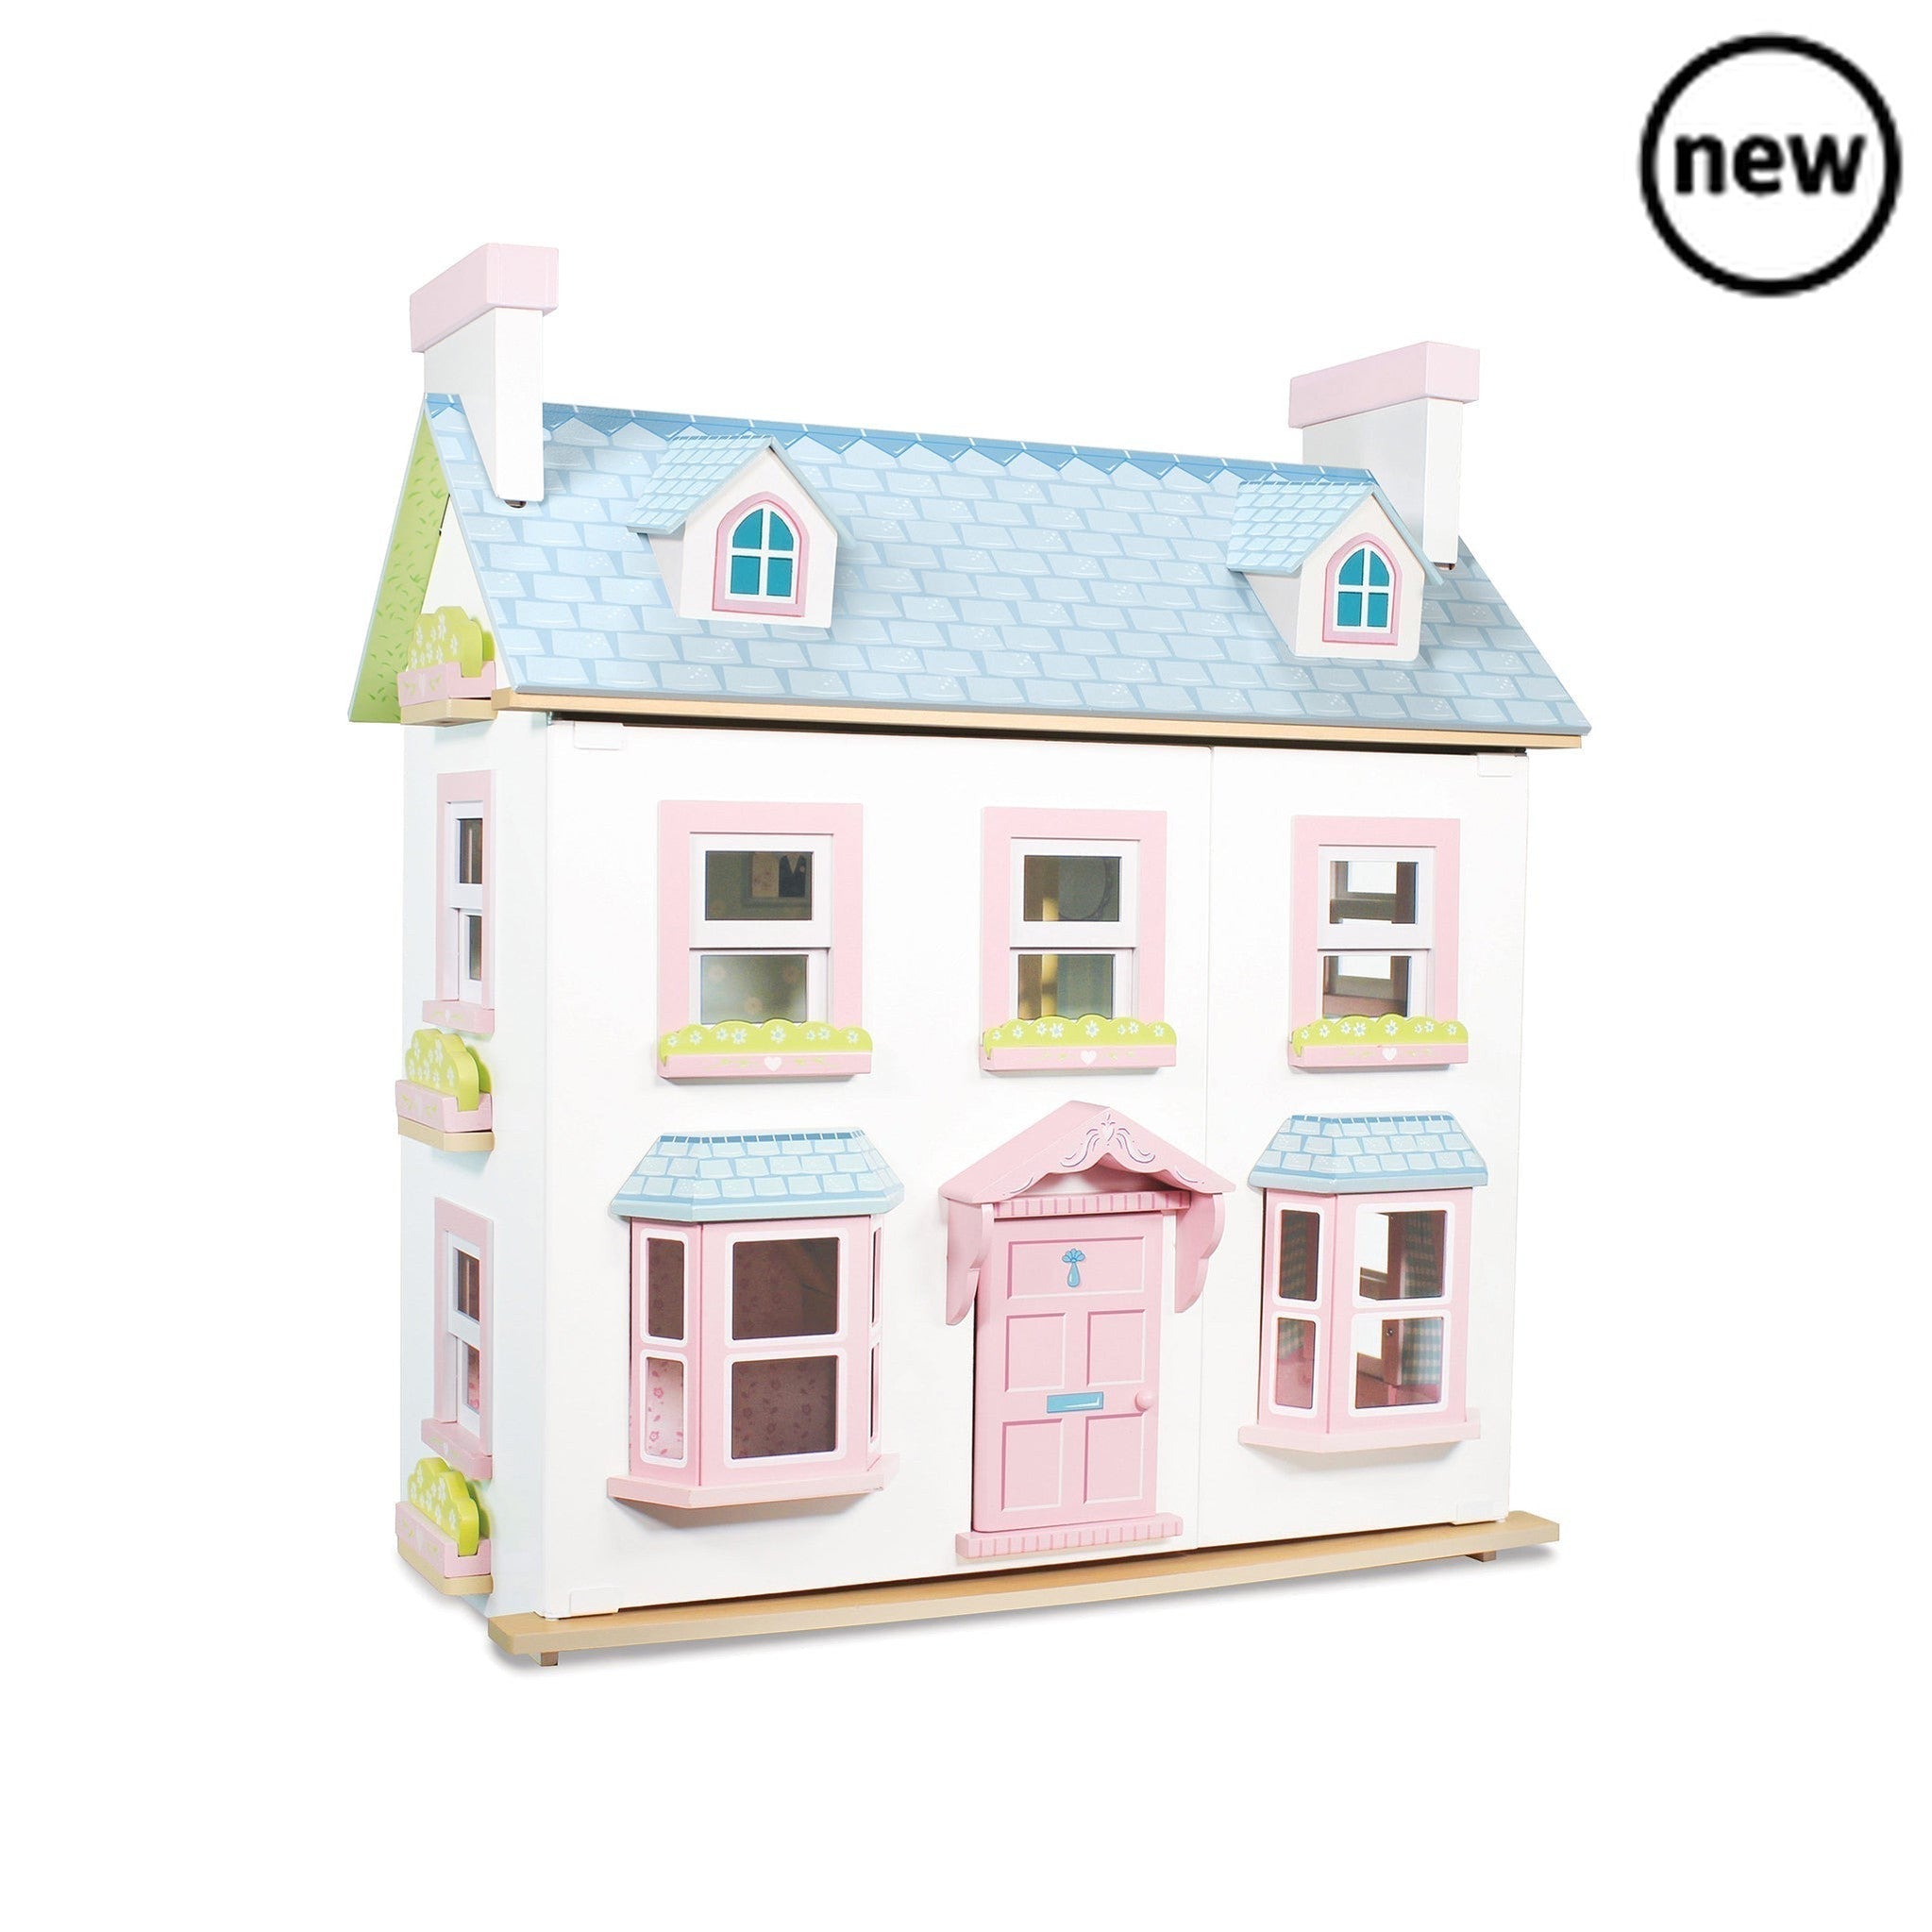 Mayberry Manor Doll House, Description Welcome to Mayberry Manor. This truly stunning, deluxe home is ready for any aspiring Duke or Duchess to move right in to and makes a perfect addition to your child’s imaginative play collection. Exquisitely crafted and decorated, this beauty comprises many wonderful details. Painted in pastel pink and blue hues and set across three storeys, this toy is ready for endless creative adventures. Sitting pretty in the nursery or playroom, this magnificent home features trad